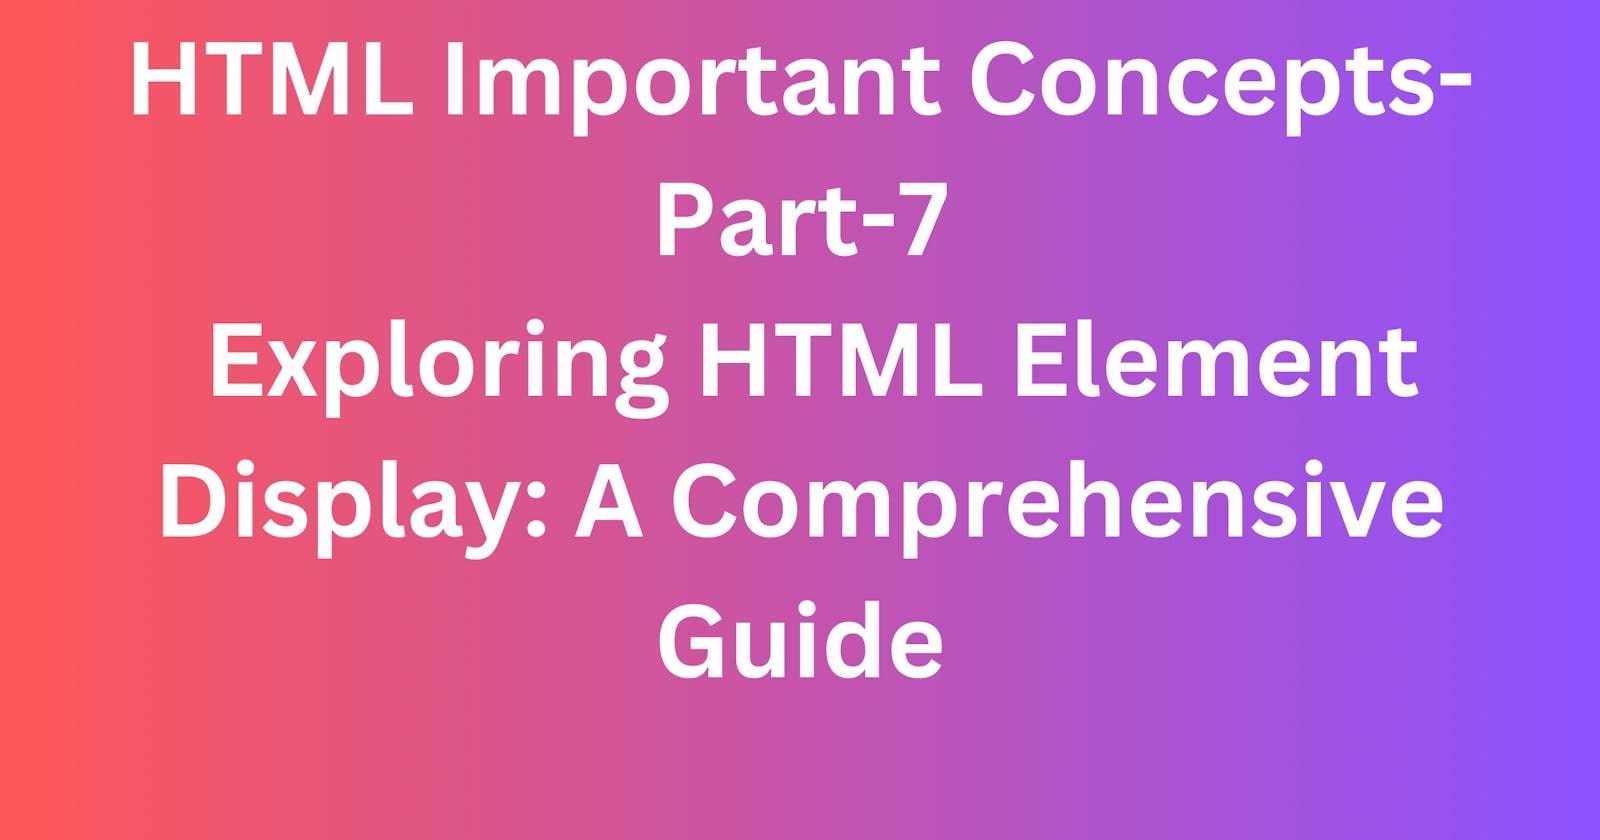 Exploring HTML Element Display: A Comprehensive Guide